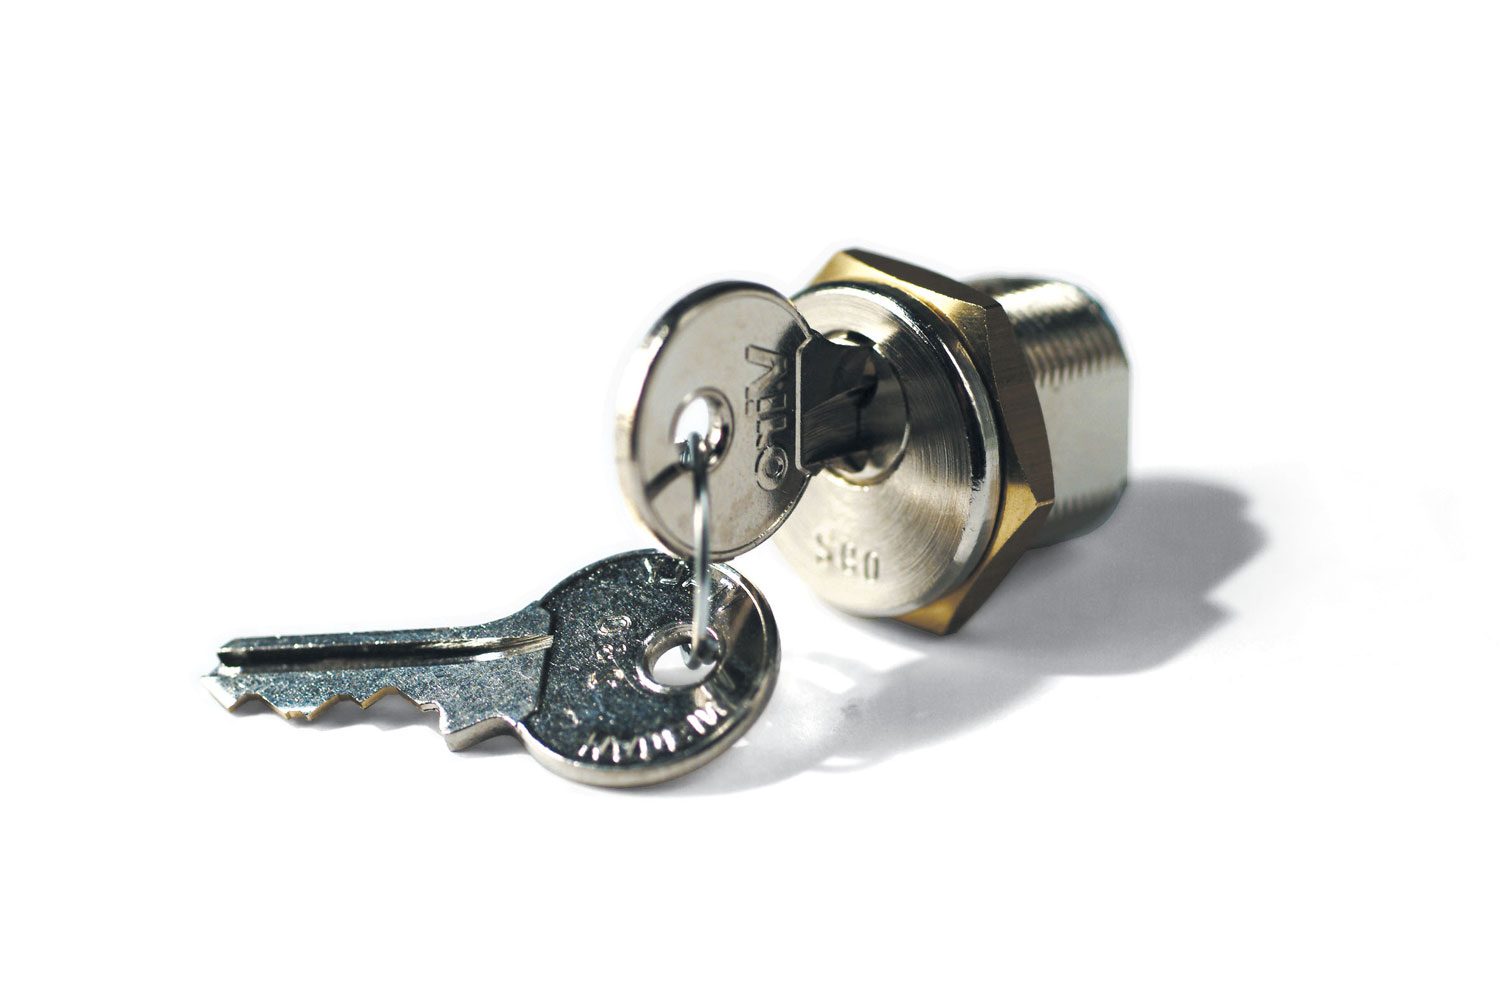 Came Cylinder Lock with key for BX motors